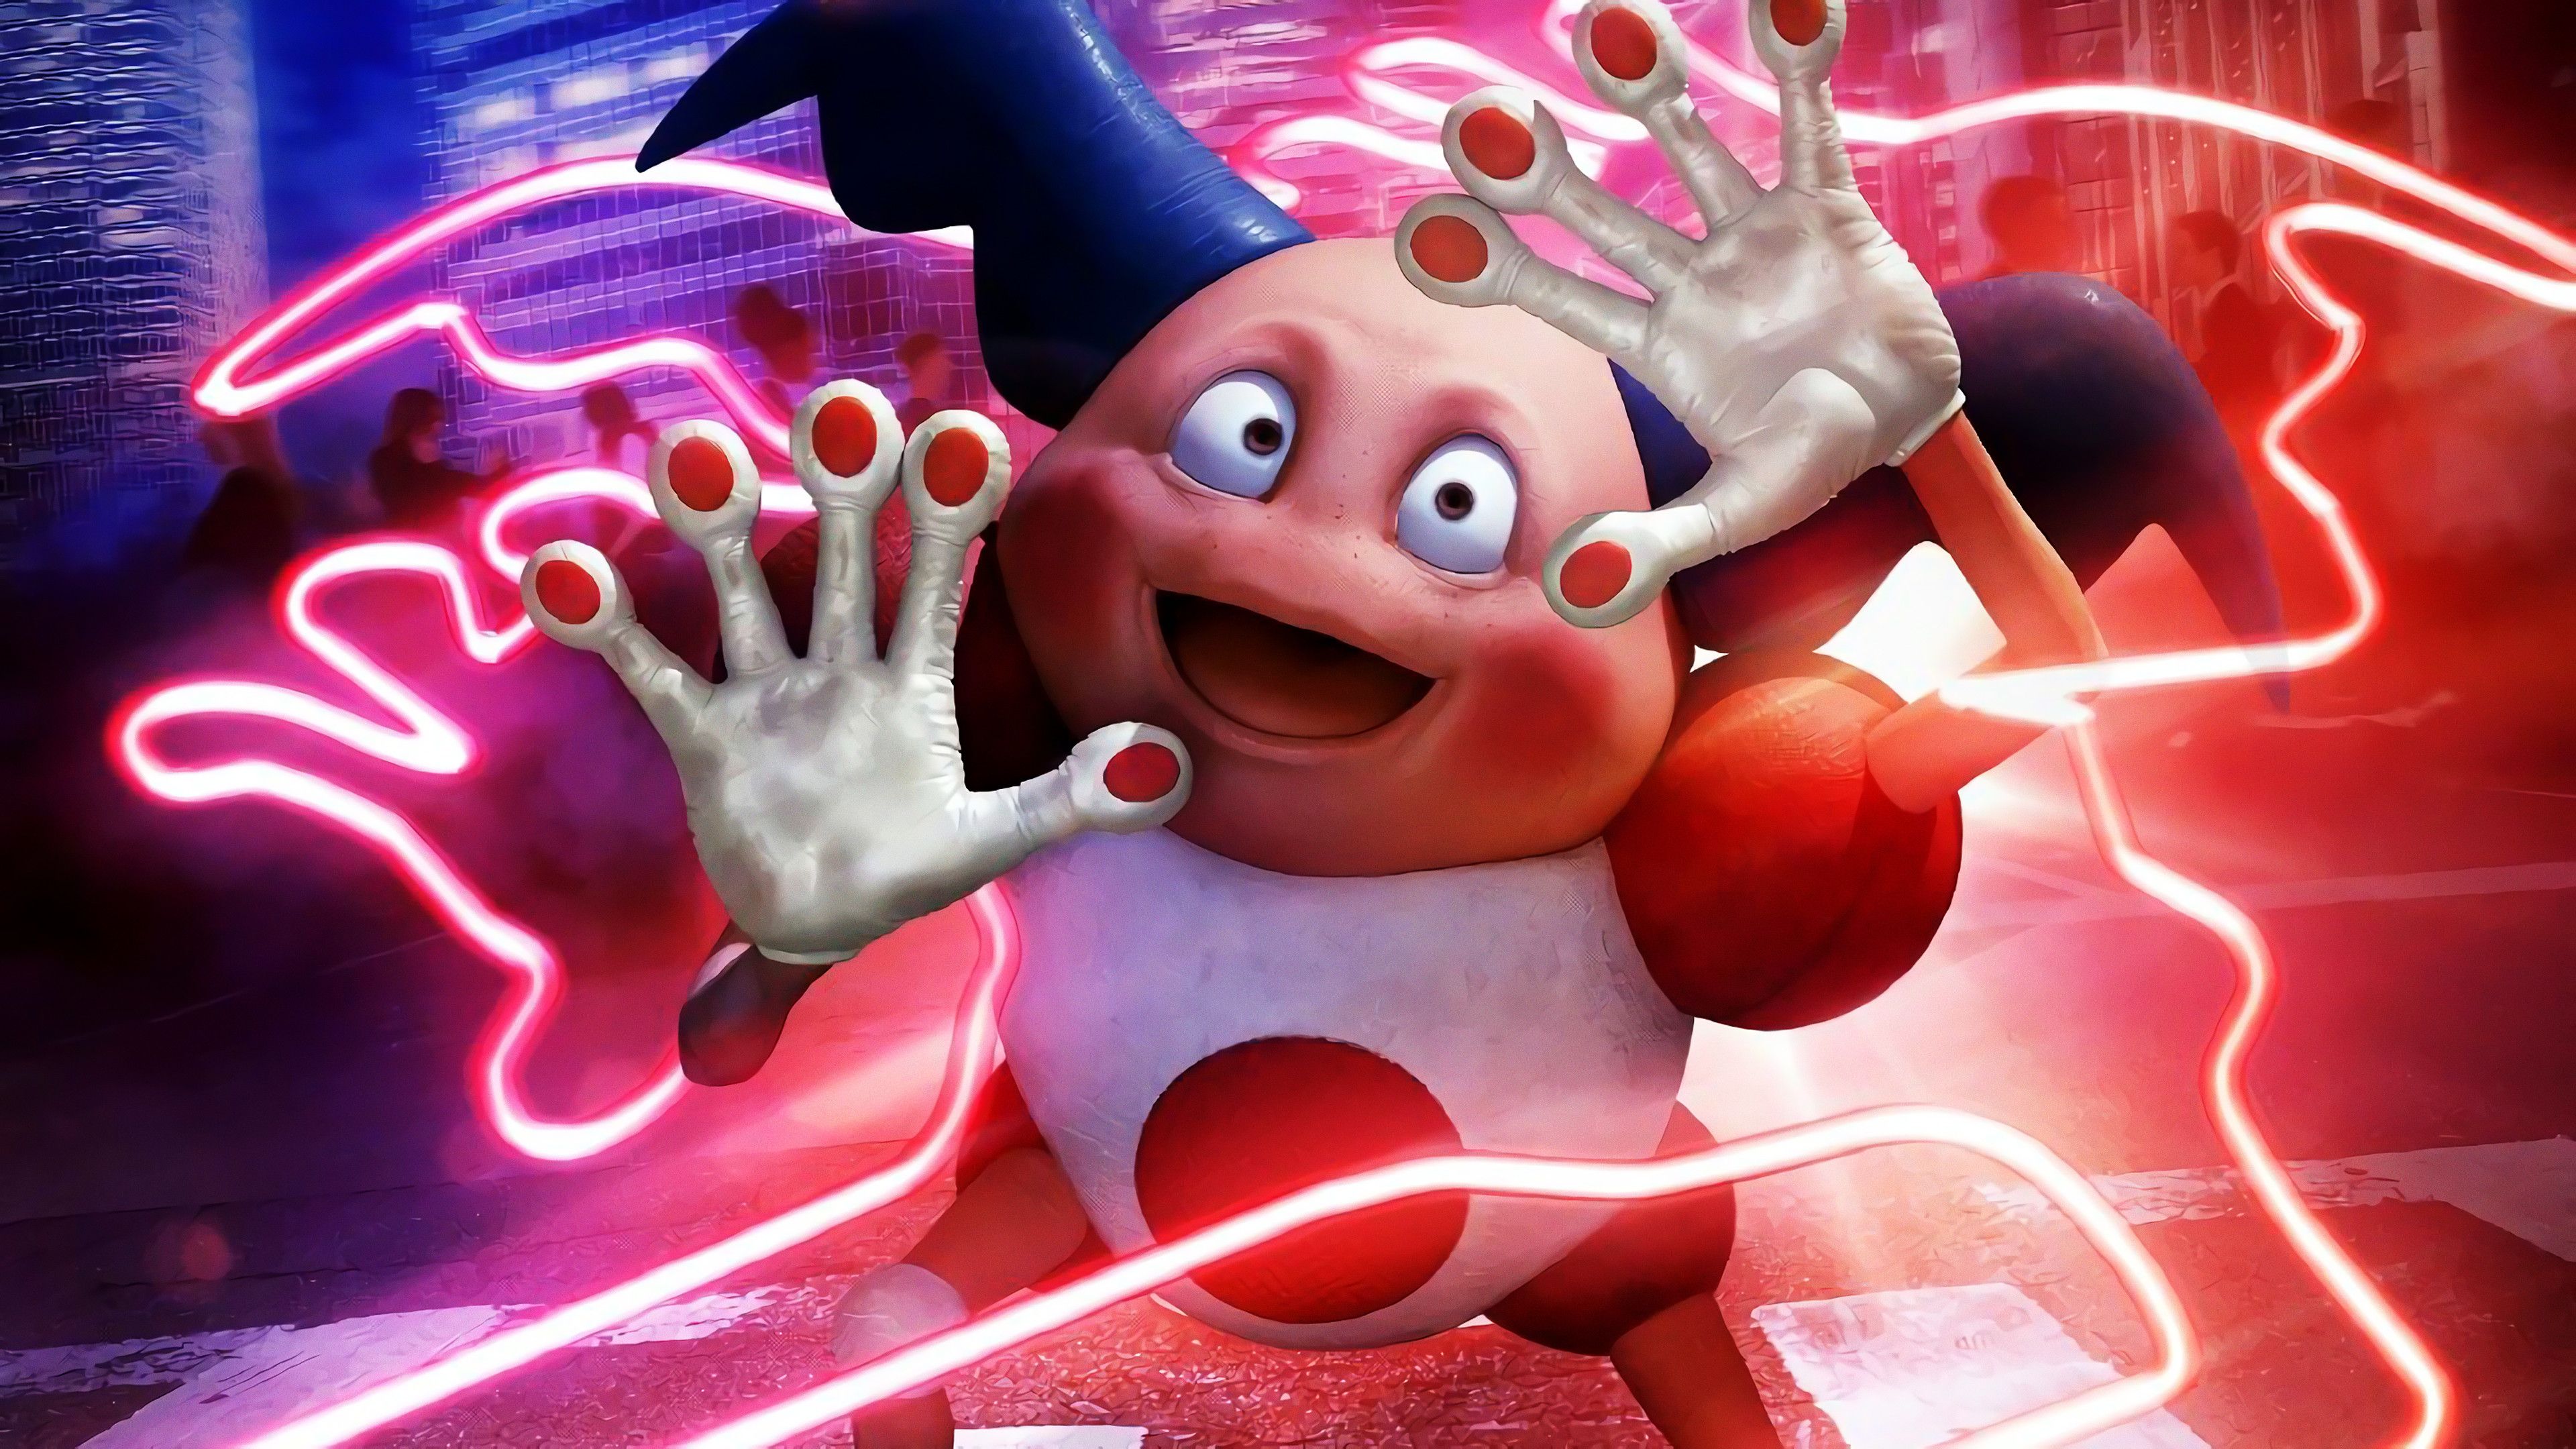 Mr. Mime Hd Wallpapers